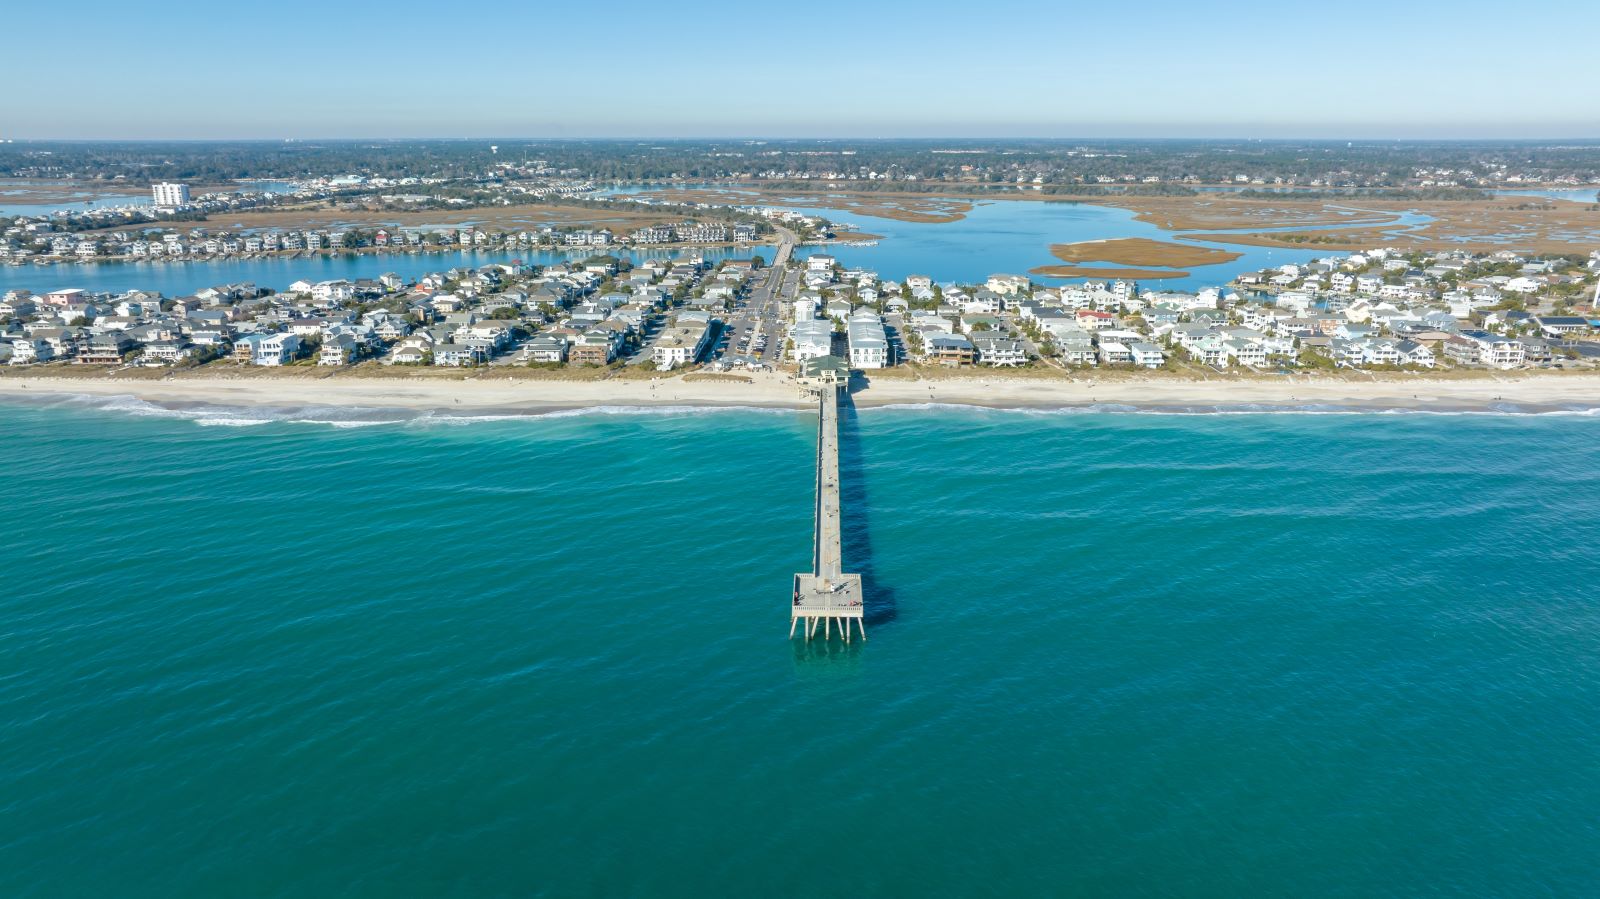 <p class="wp-caption-text">Image Credit: Shutterstock / Red Lemon</p>  <p>Drive along the barrier islands of North Carolina, with stunning ocean views and unique coastal communities.</p>